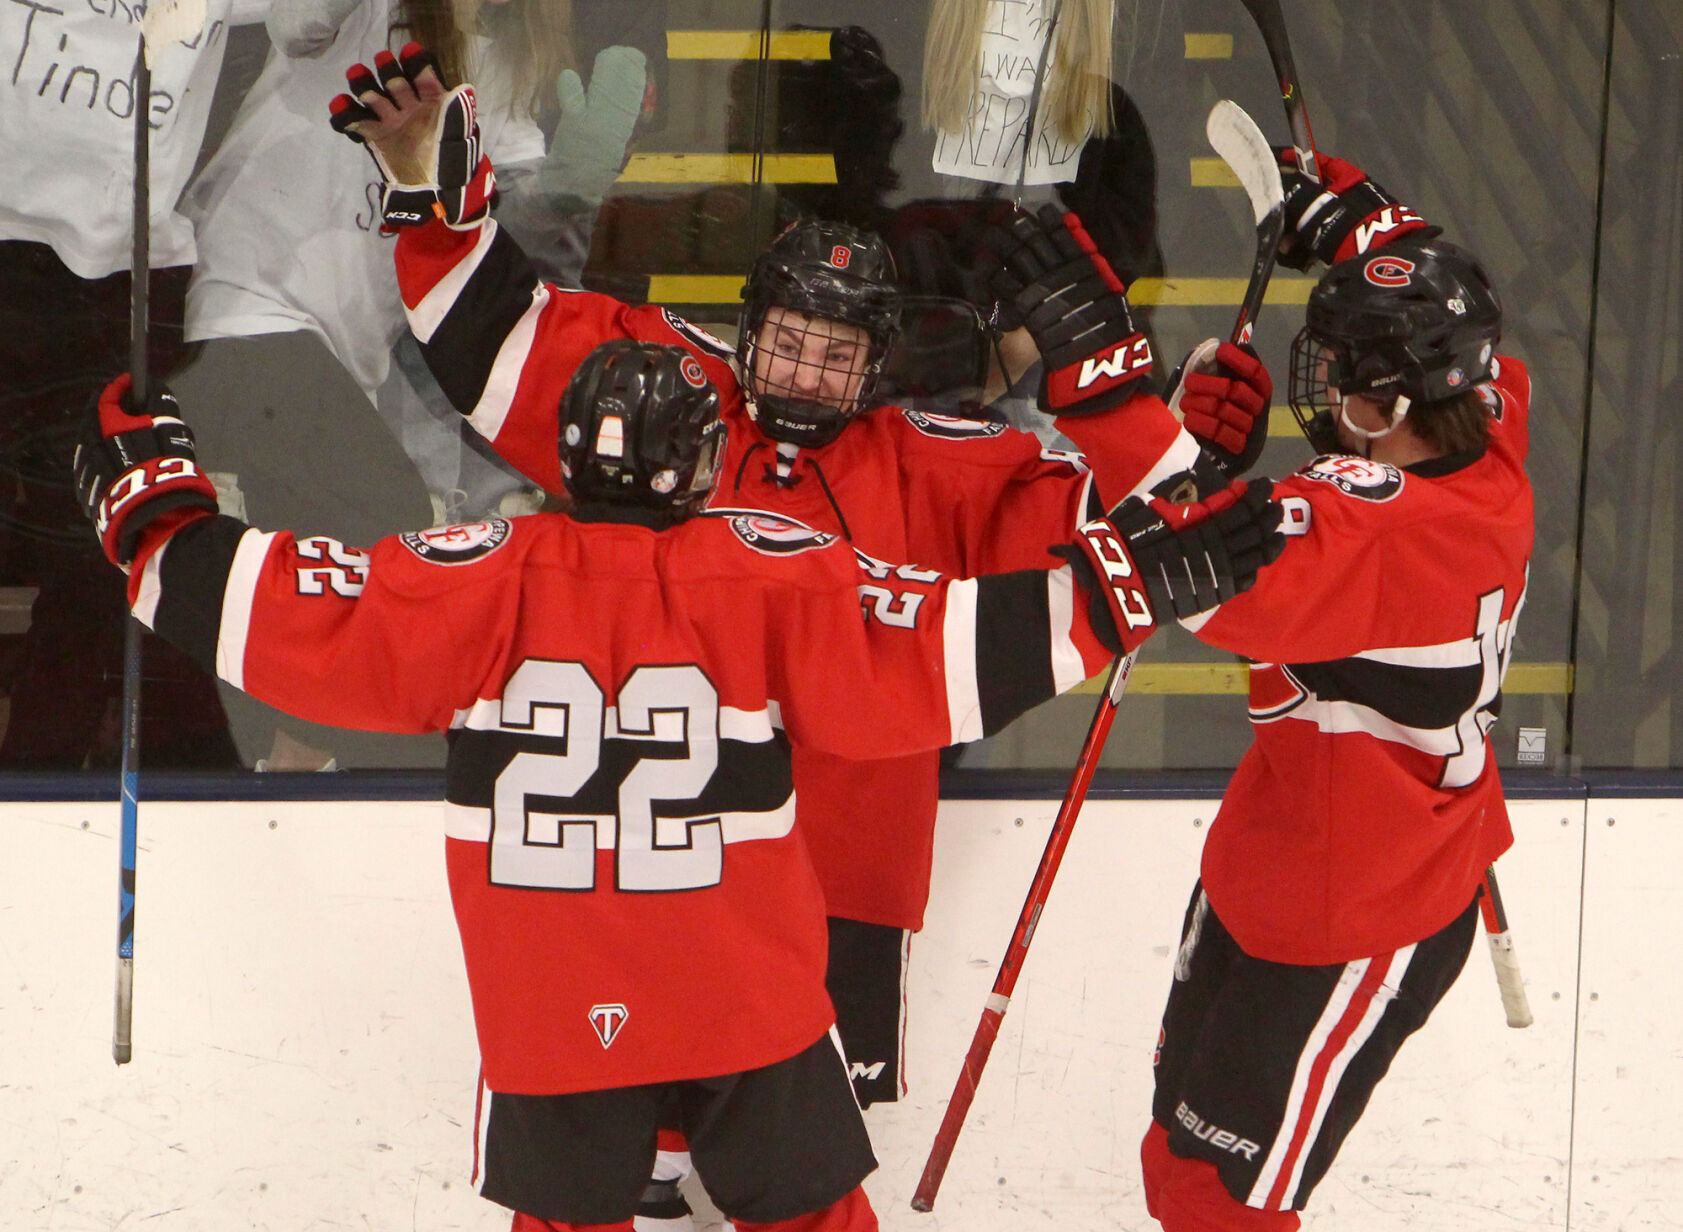 Prep Boys Hockey Division 1 Regionals Bowe, Carlson score late goals to rally Chi-Hi past Eau Claire North and into sectionals